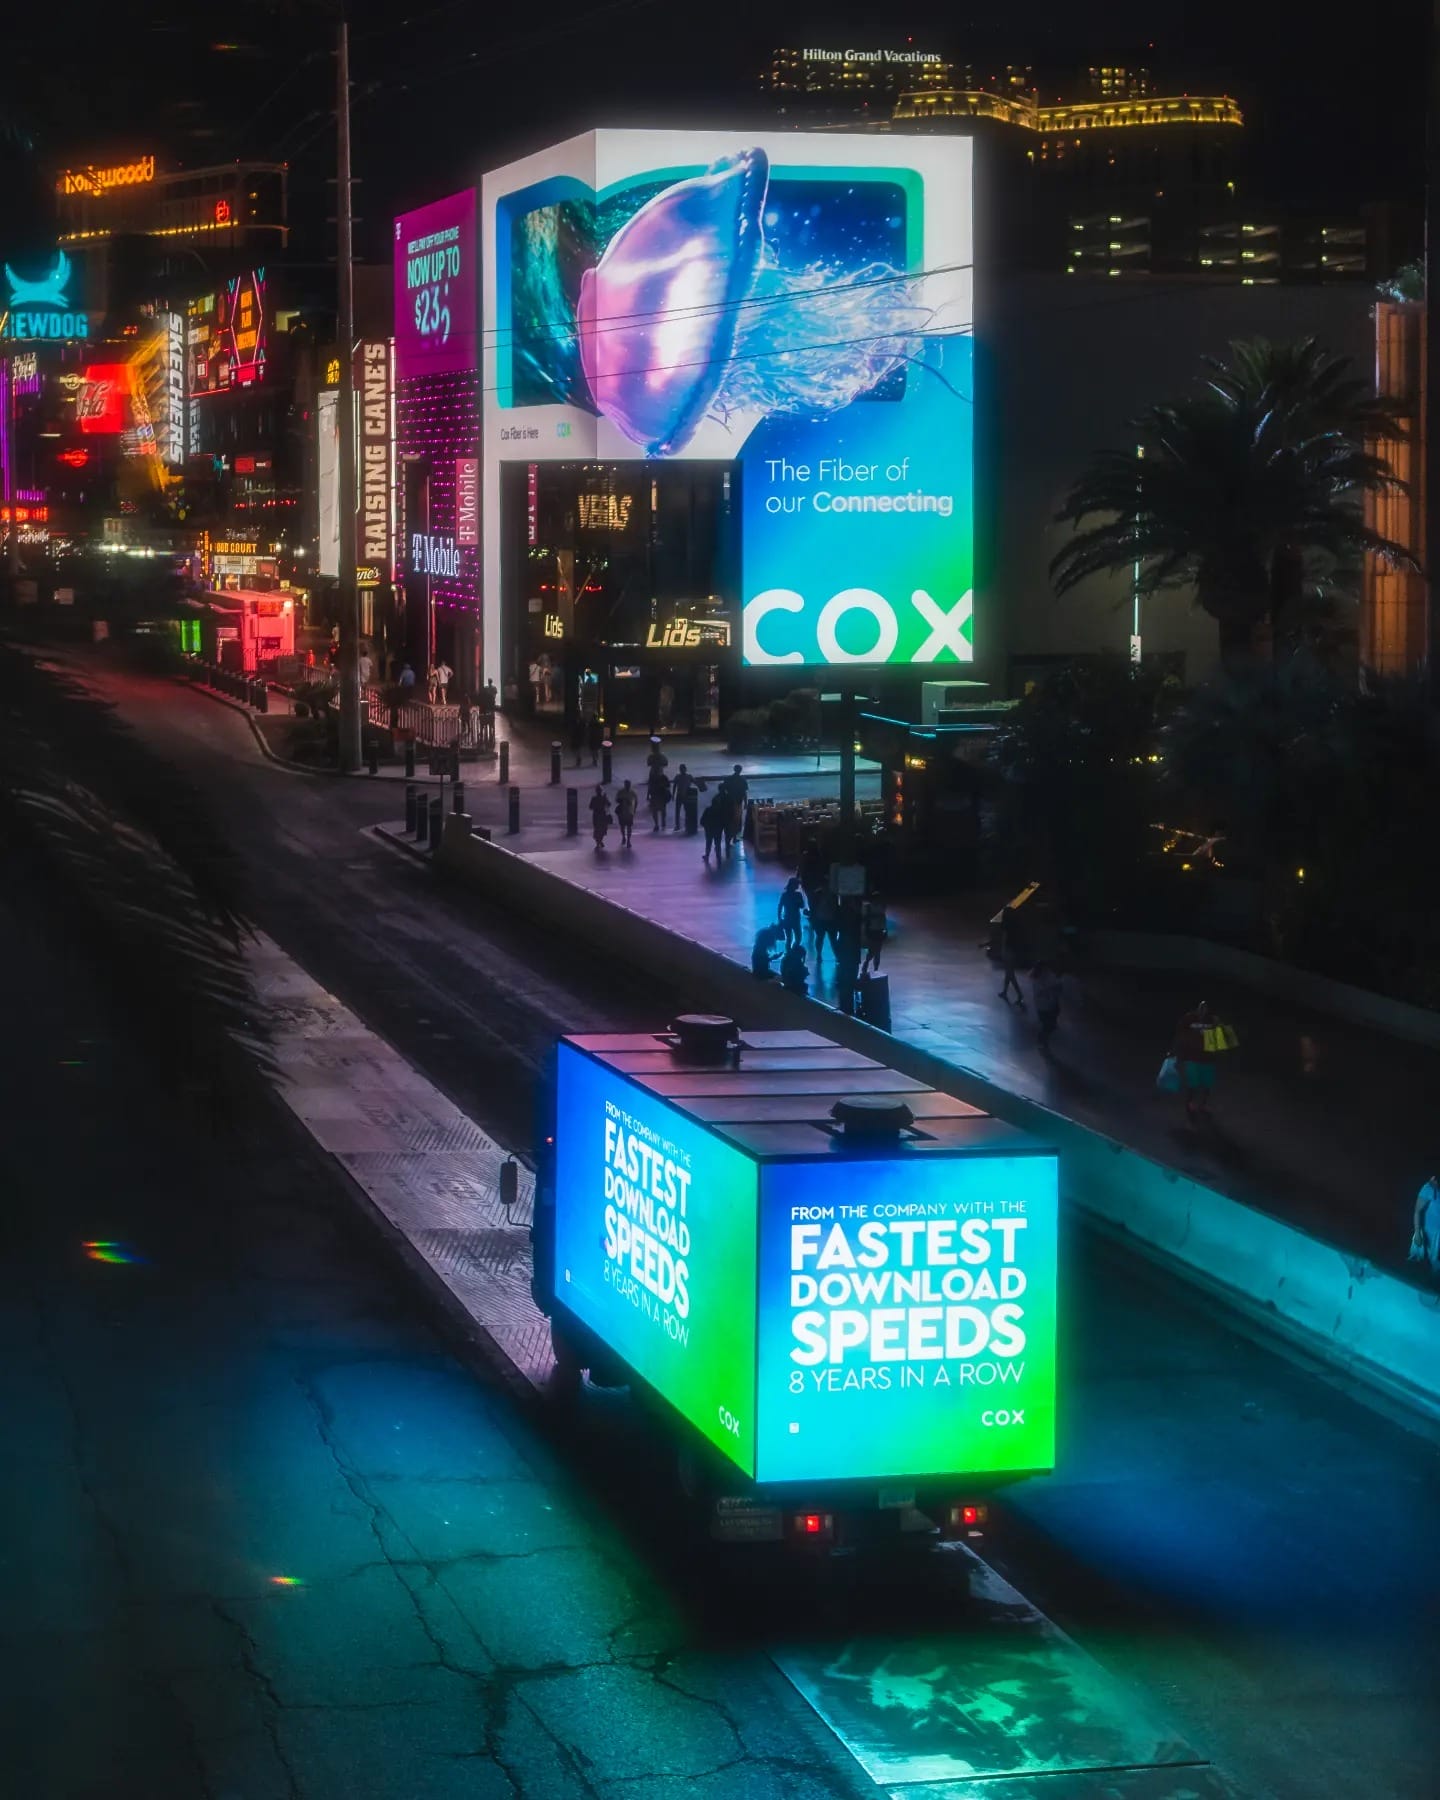 Illuminated billboards and truck ad at nighttime in city.